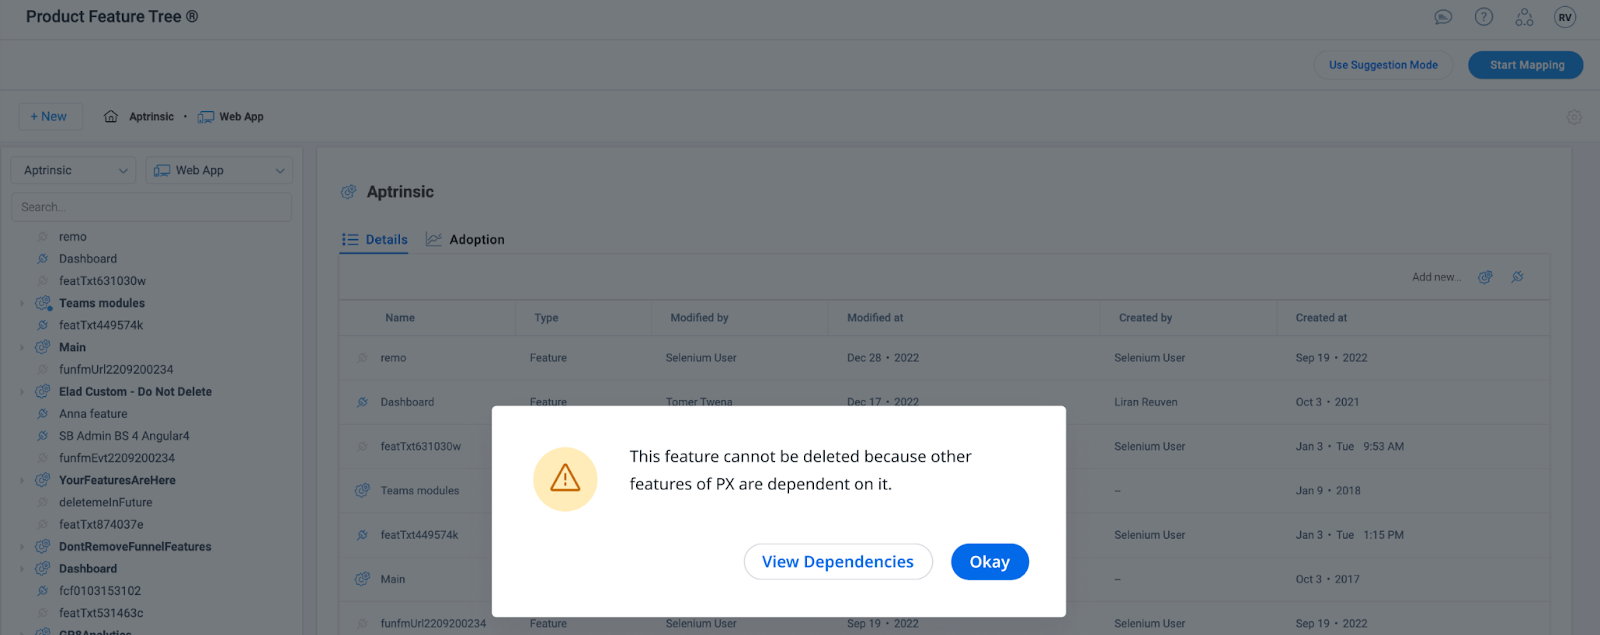 Image of the Product Feature Tree displaying a warning message 'This feature cannot be deleted because other features of PX are dependent on it.' with a 'View Dependencies' button.